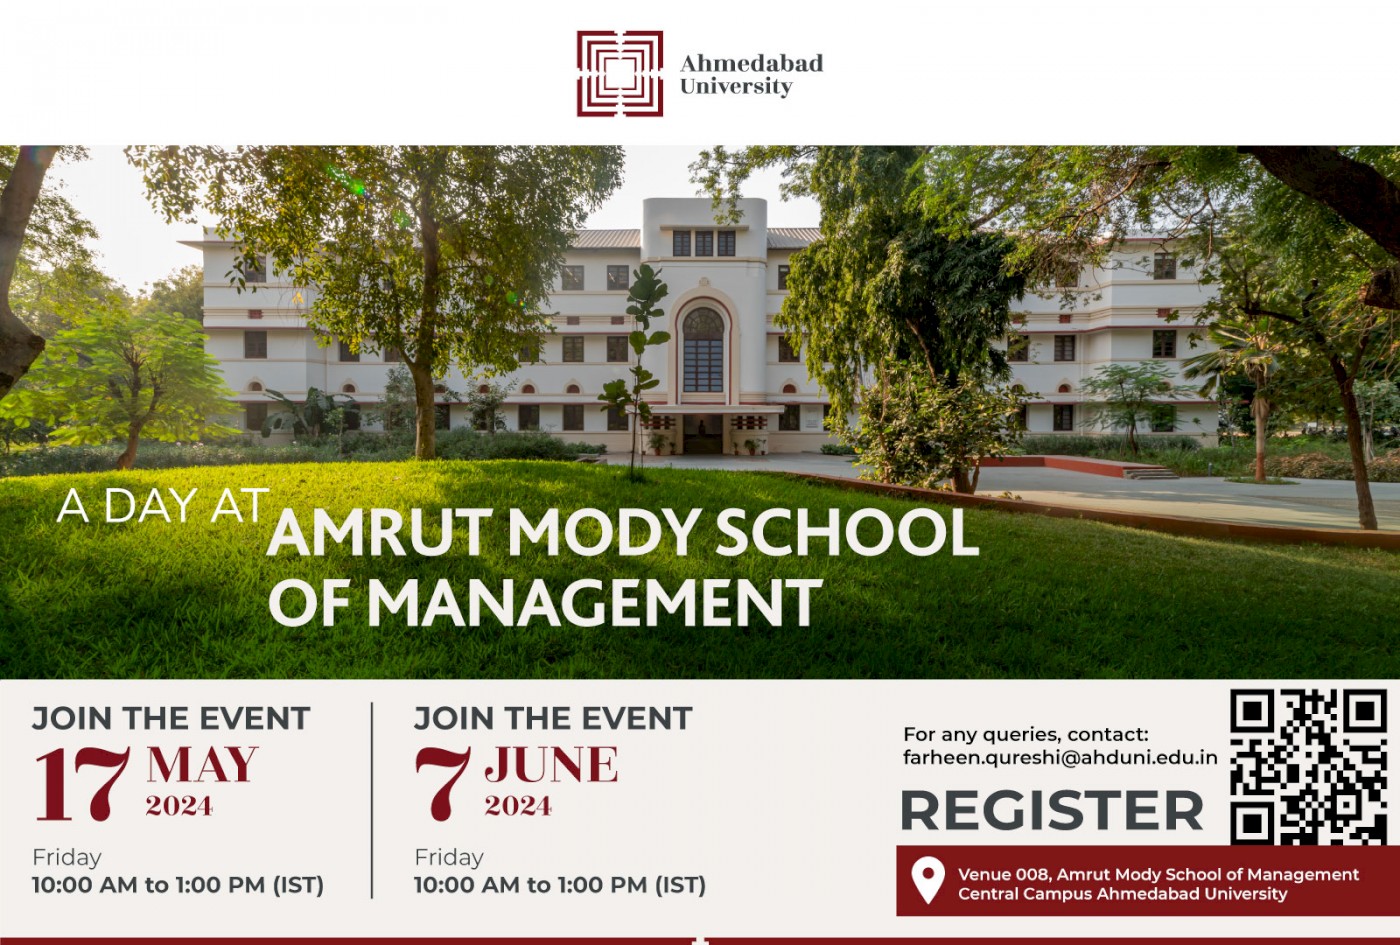 A Day at Amrut Mody School of Management